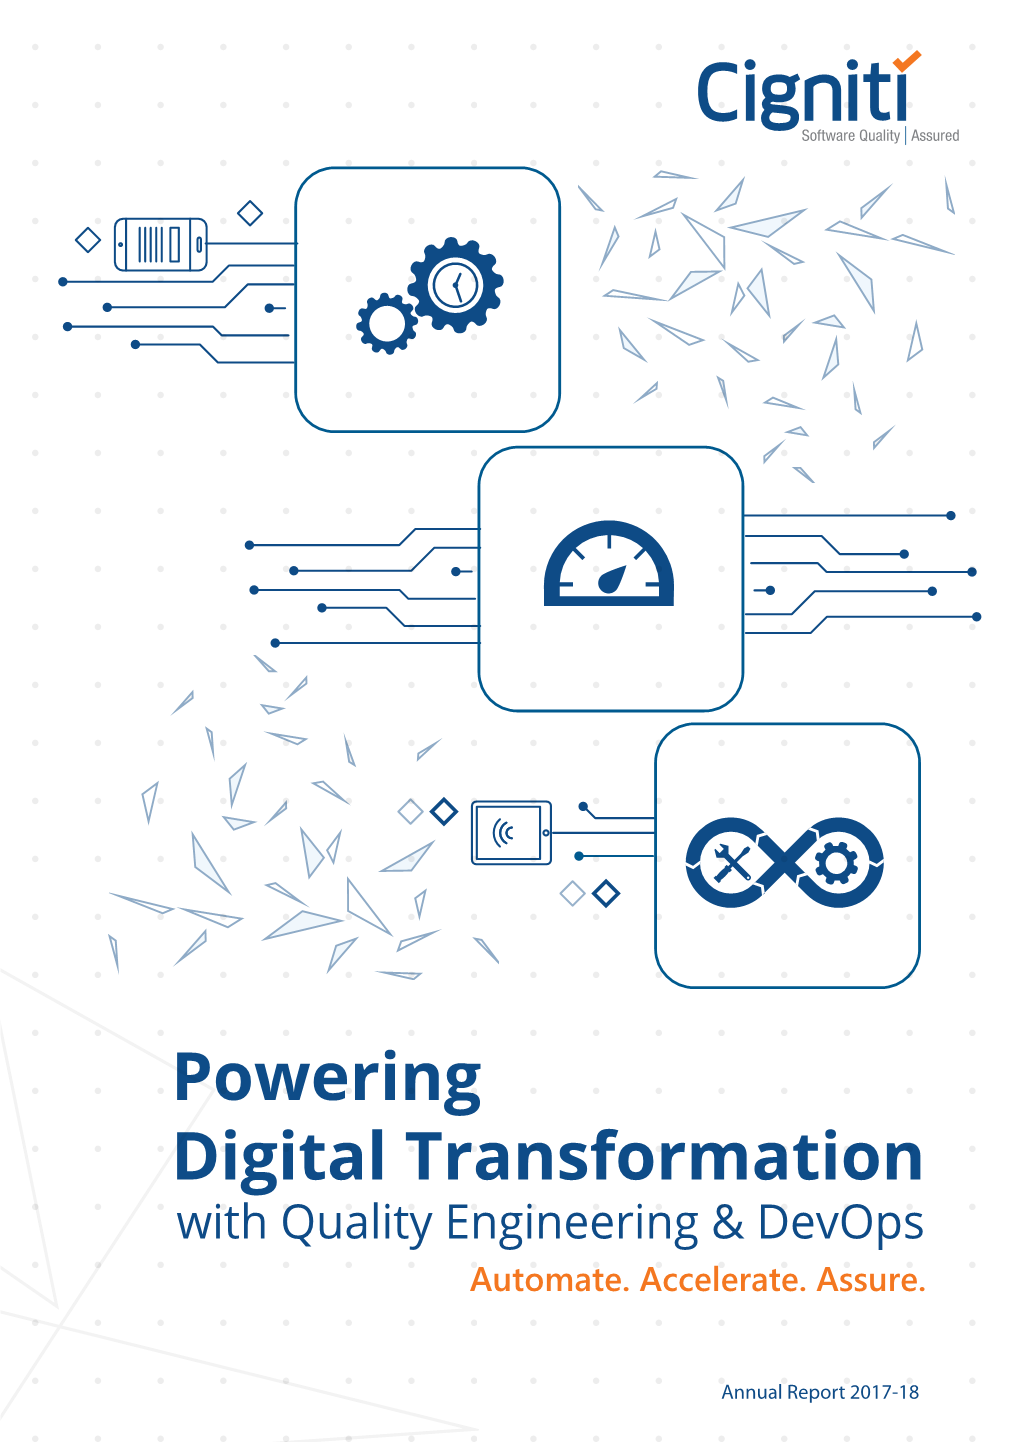 Powering Digital Transformation with Quality Engineering & Devops Automate